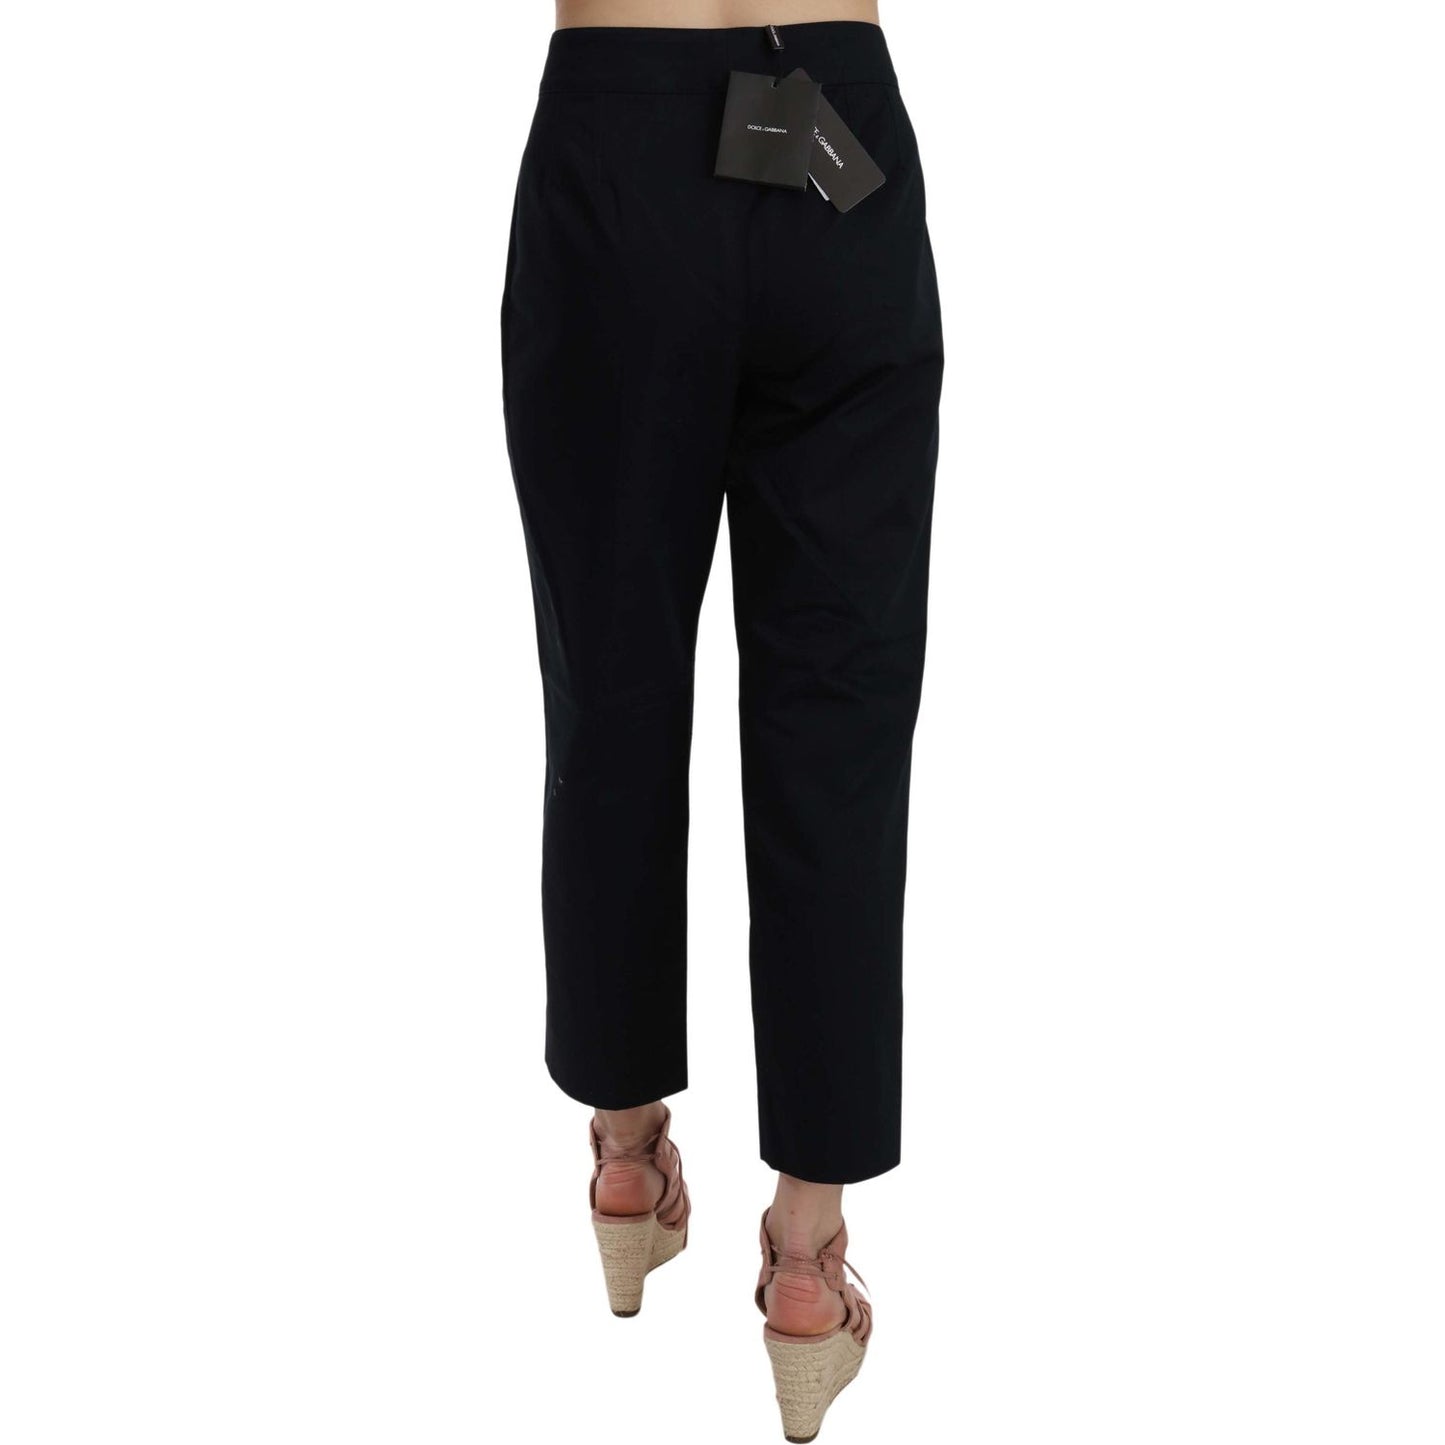 Dolce & Gabbana Chic Black Cotton Trousers Jeans & Pants black-cropped-front-button-embellished-pants